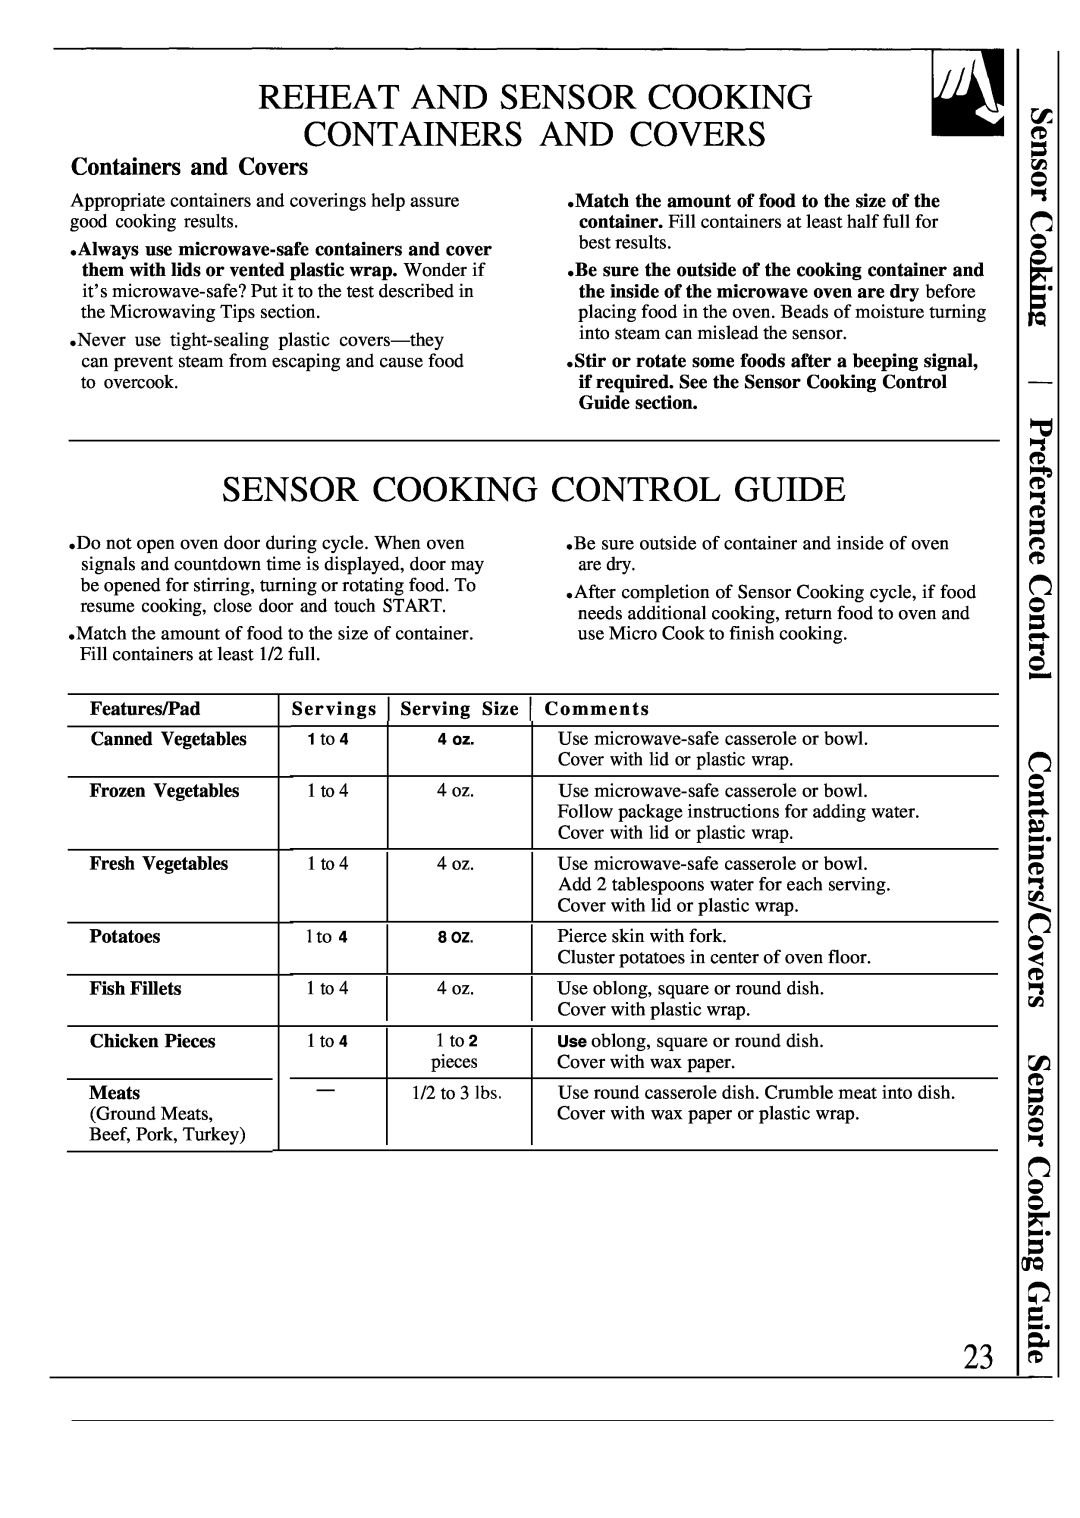 GE 164D2966P143 Reheat And Sensor Cooking Containers And Covers, Sensor Cooking Control Guide, Containers and Covers 